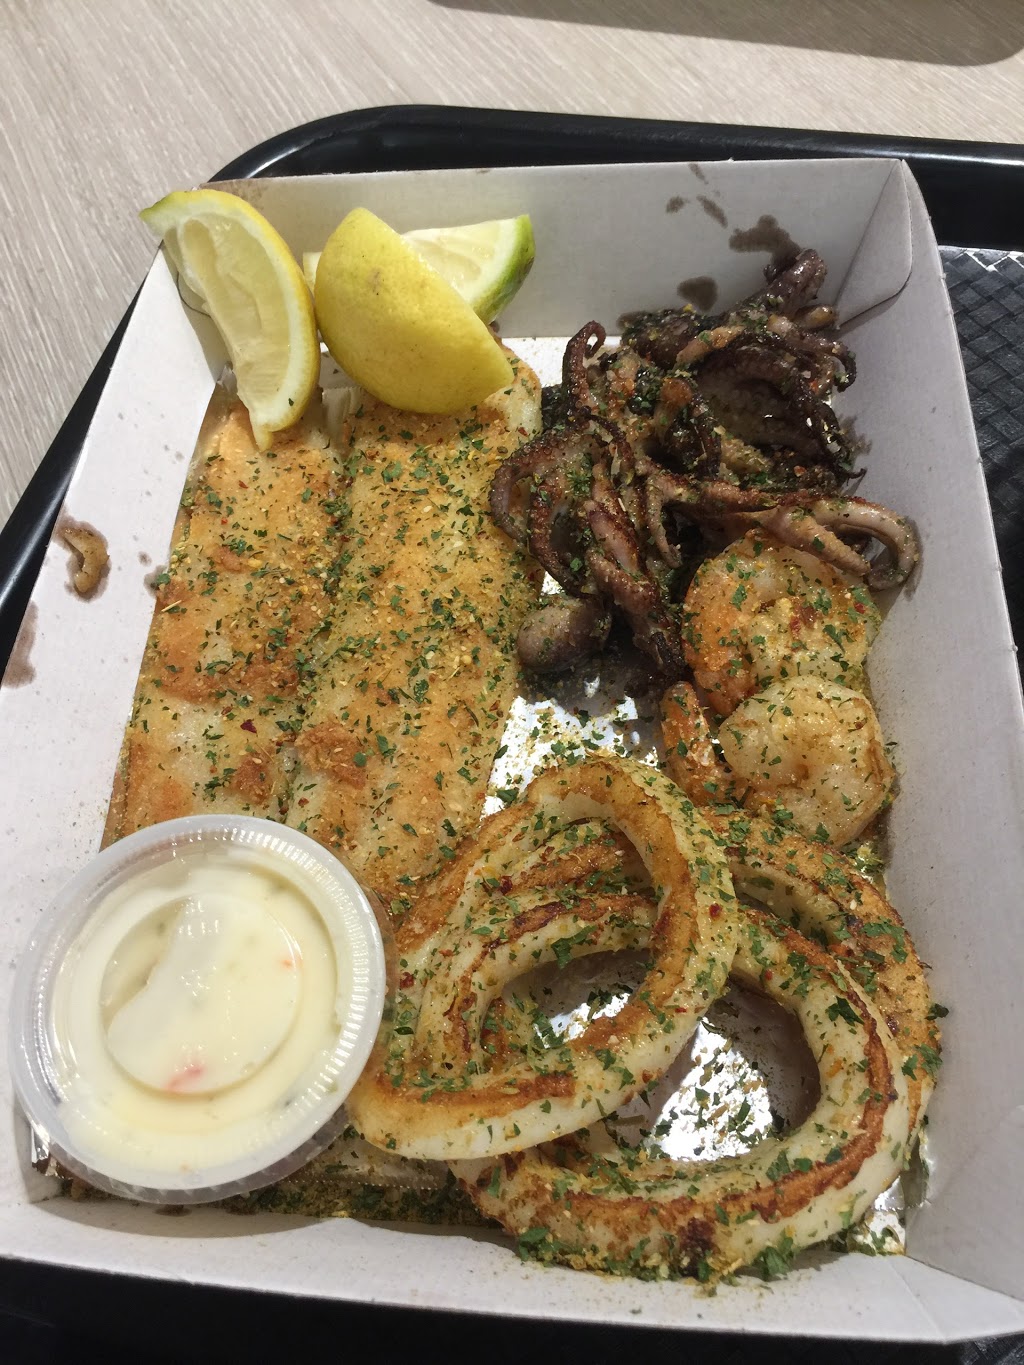 Mr Seafood | meal takeaway | Stacey St, Bankstown NSW 2200, Australia | 0297071921 OR +61 2 9707 1921